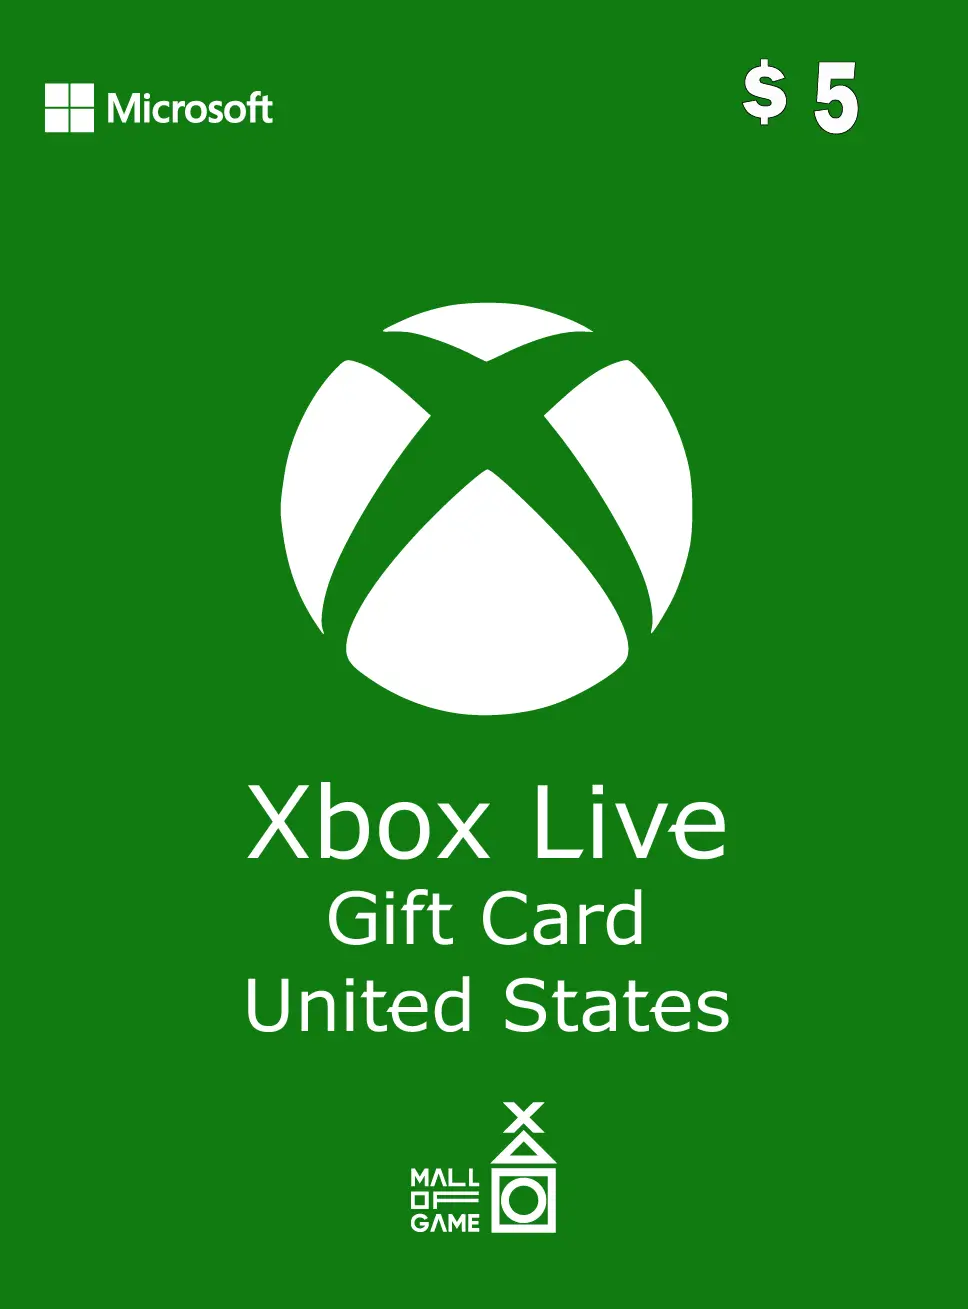 Xbox Live Gift Card - US$ 5